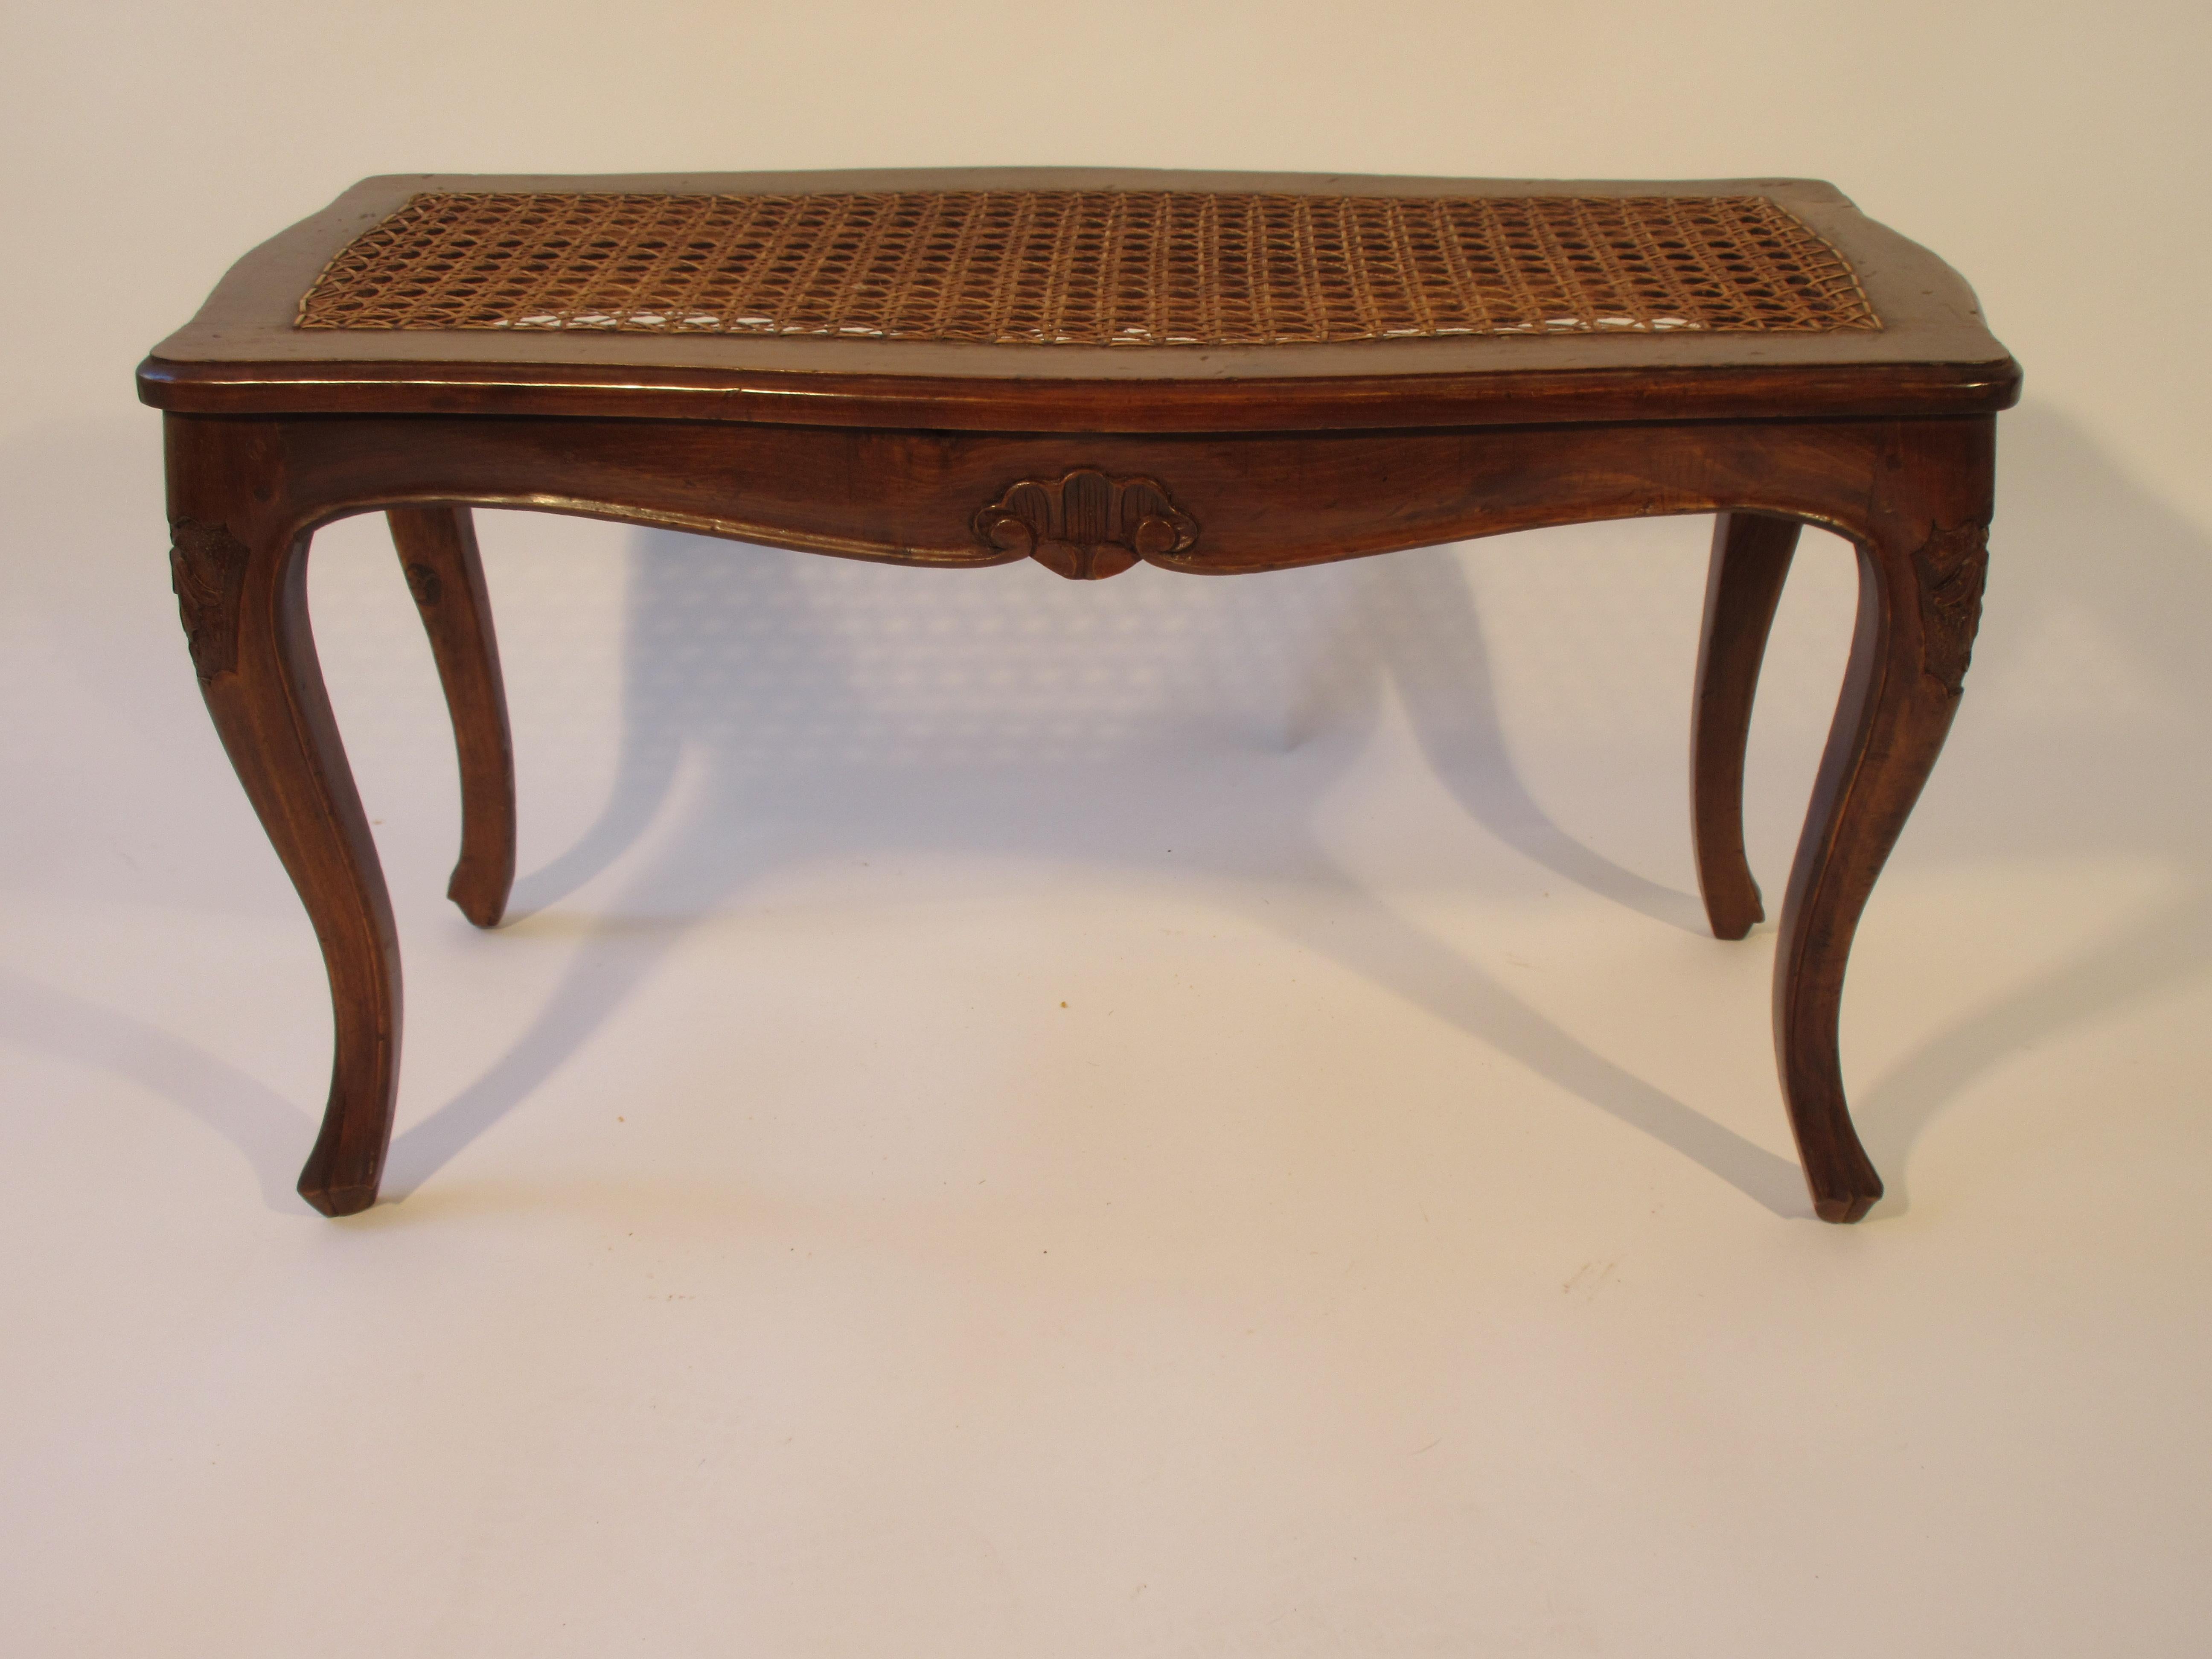 1950s carved wood caned seated bench.